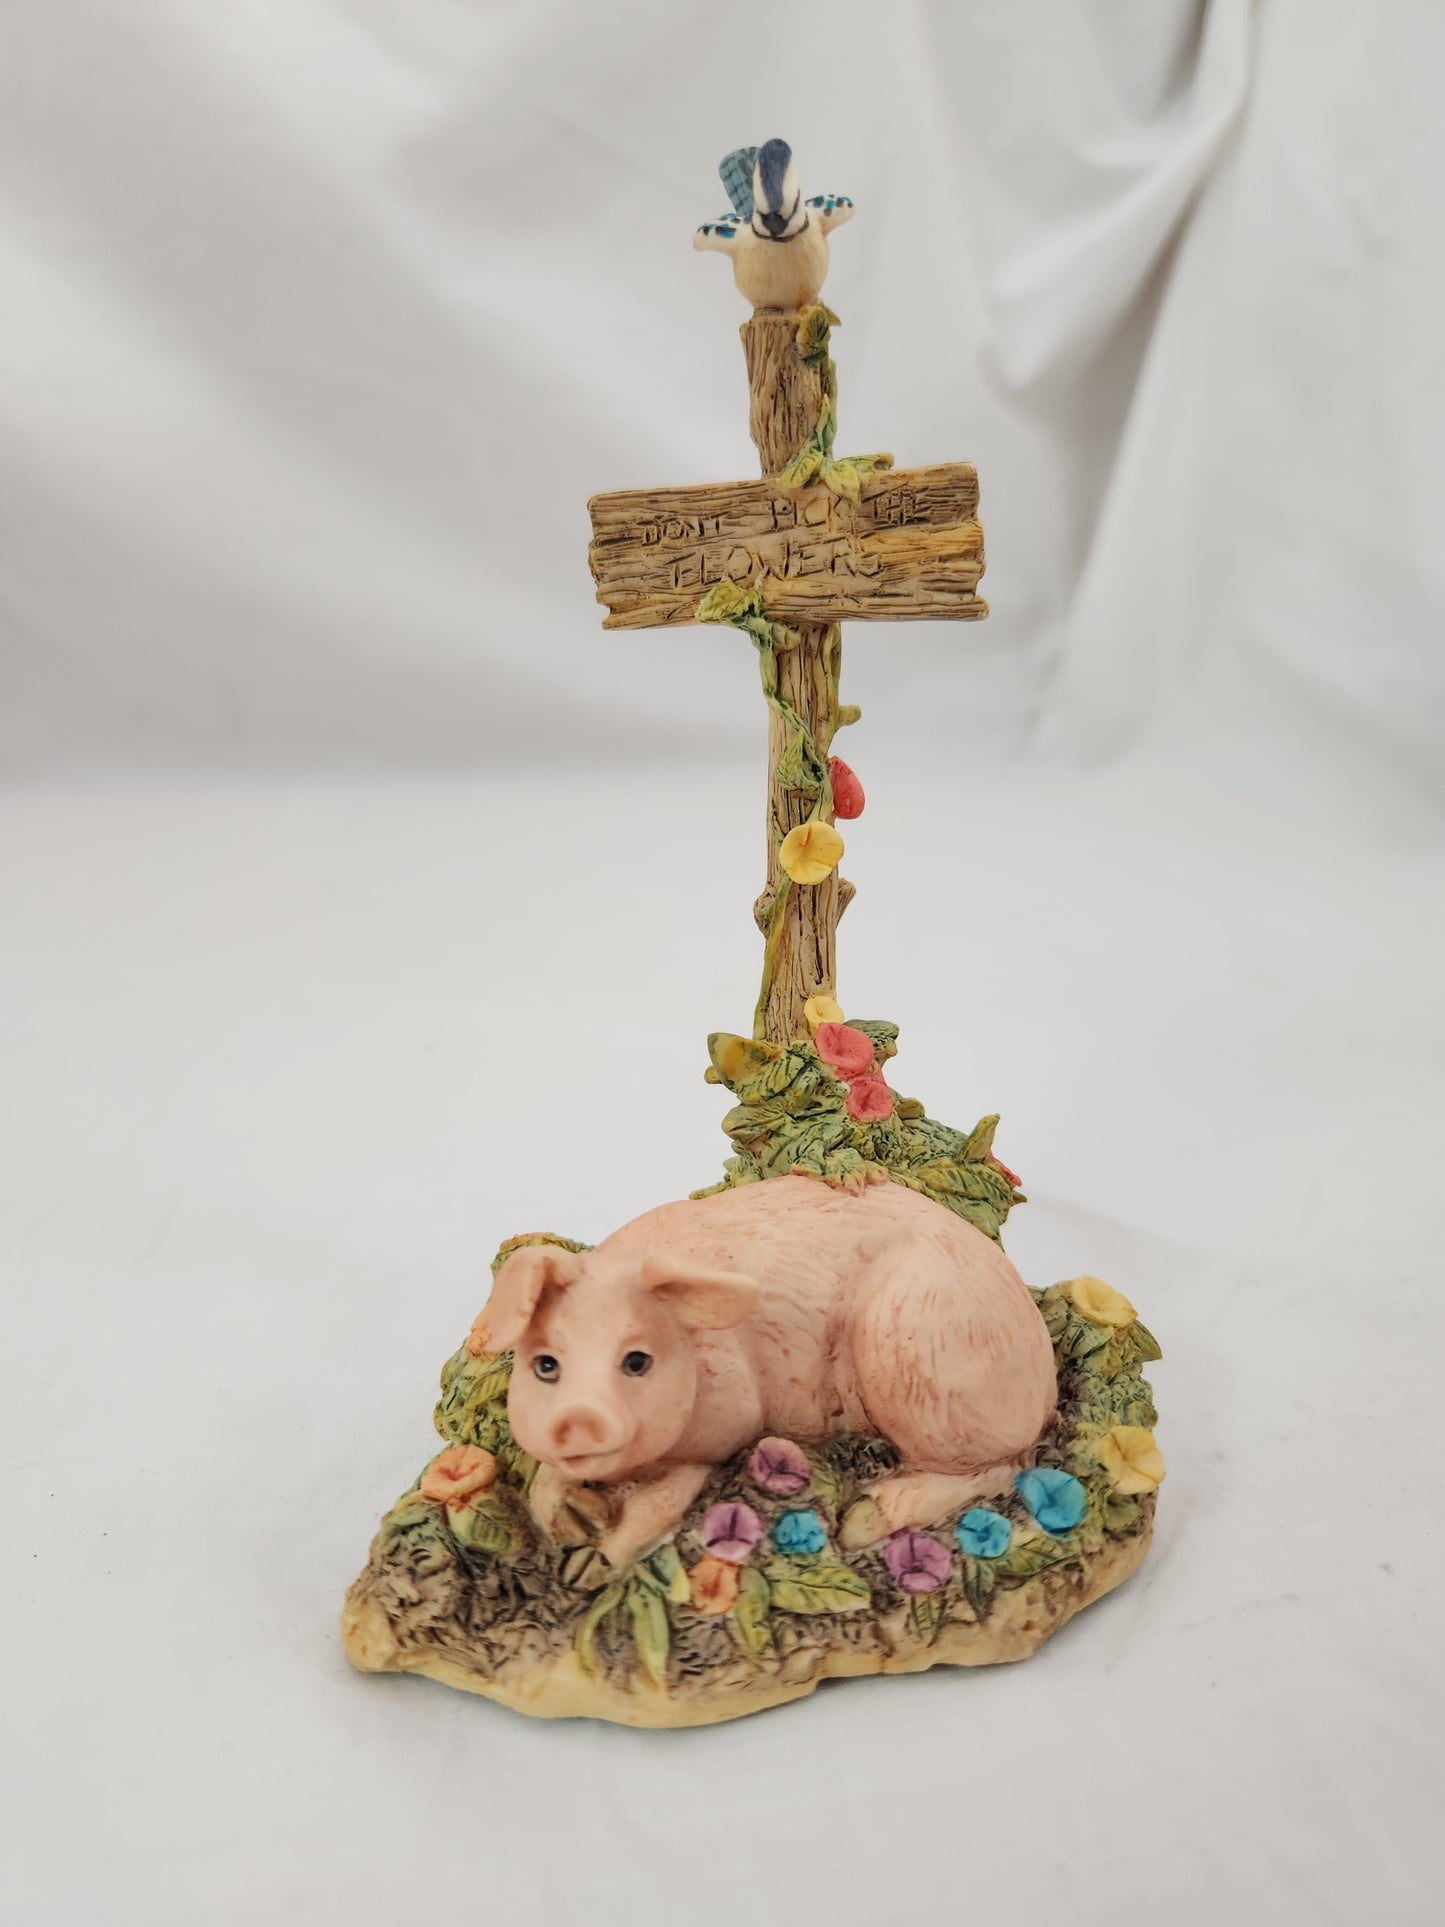 "Don't Pick the Flowers" Figurine by Lowell Davis - #221007